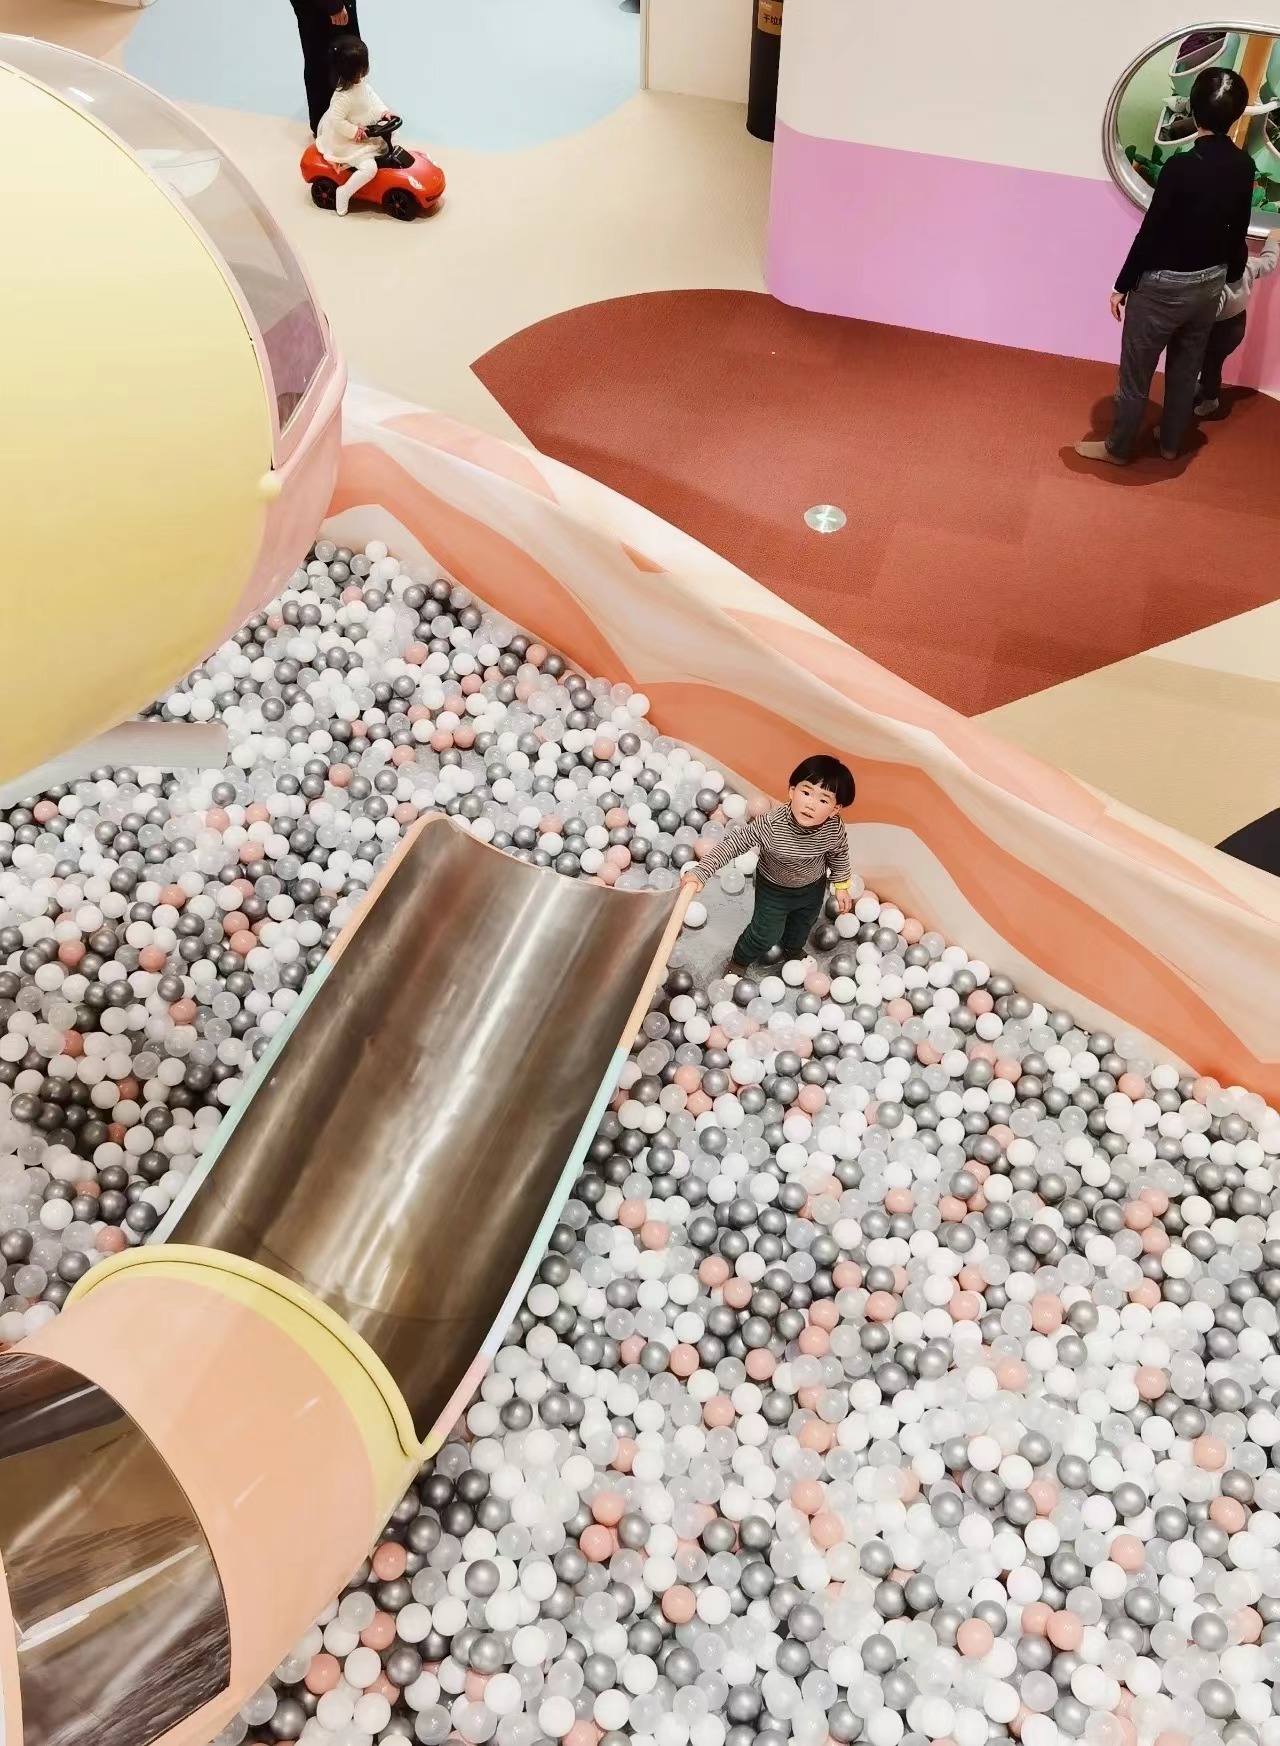 How to set reasonable pricing and fees for investing in an indoor playground?